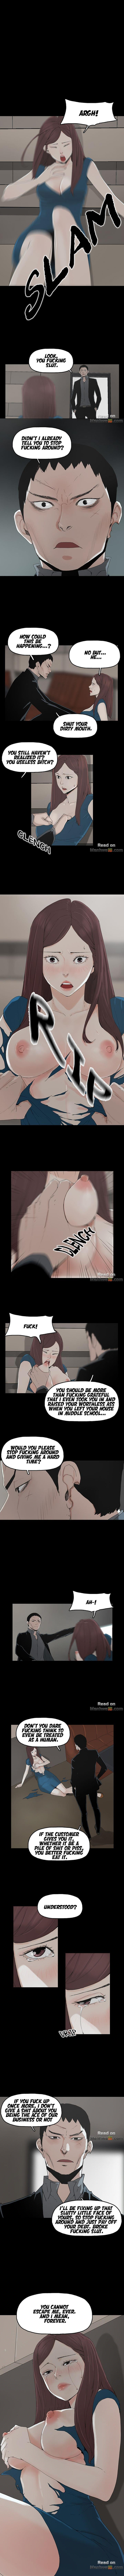 Scandal SURROGATE MOTHER Ch. 2 Gorgeous - Page 6